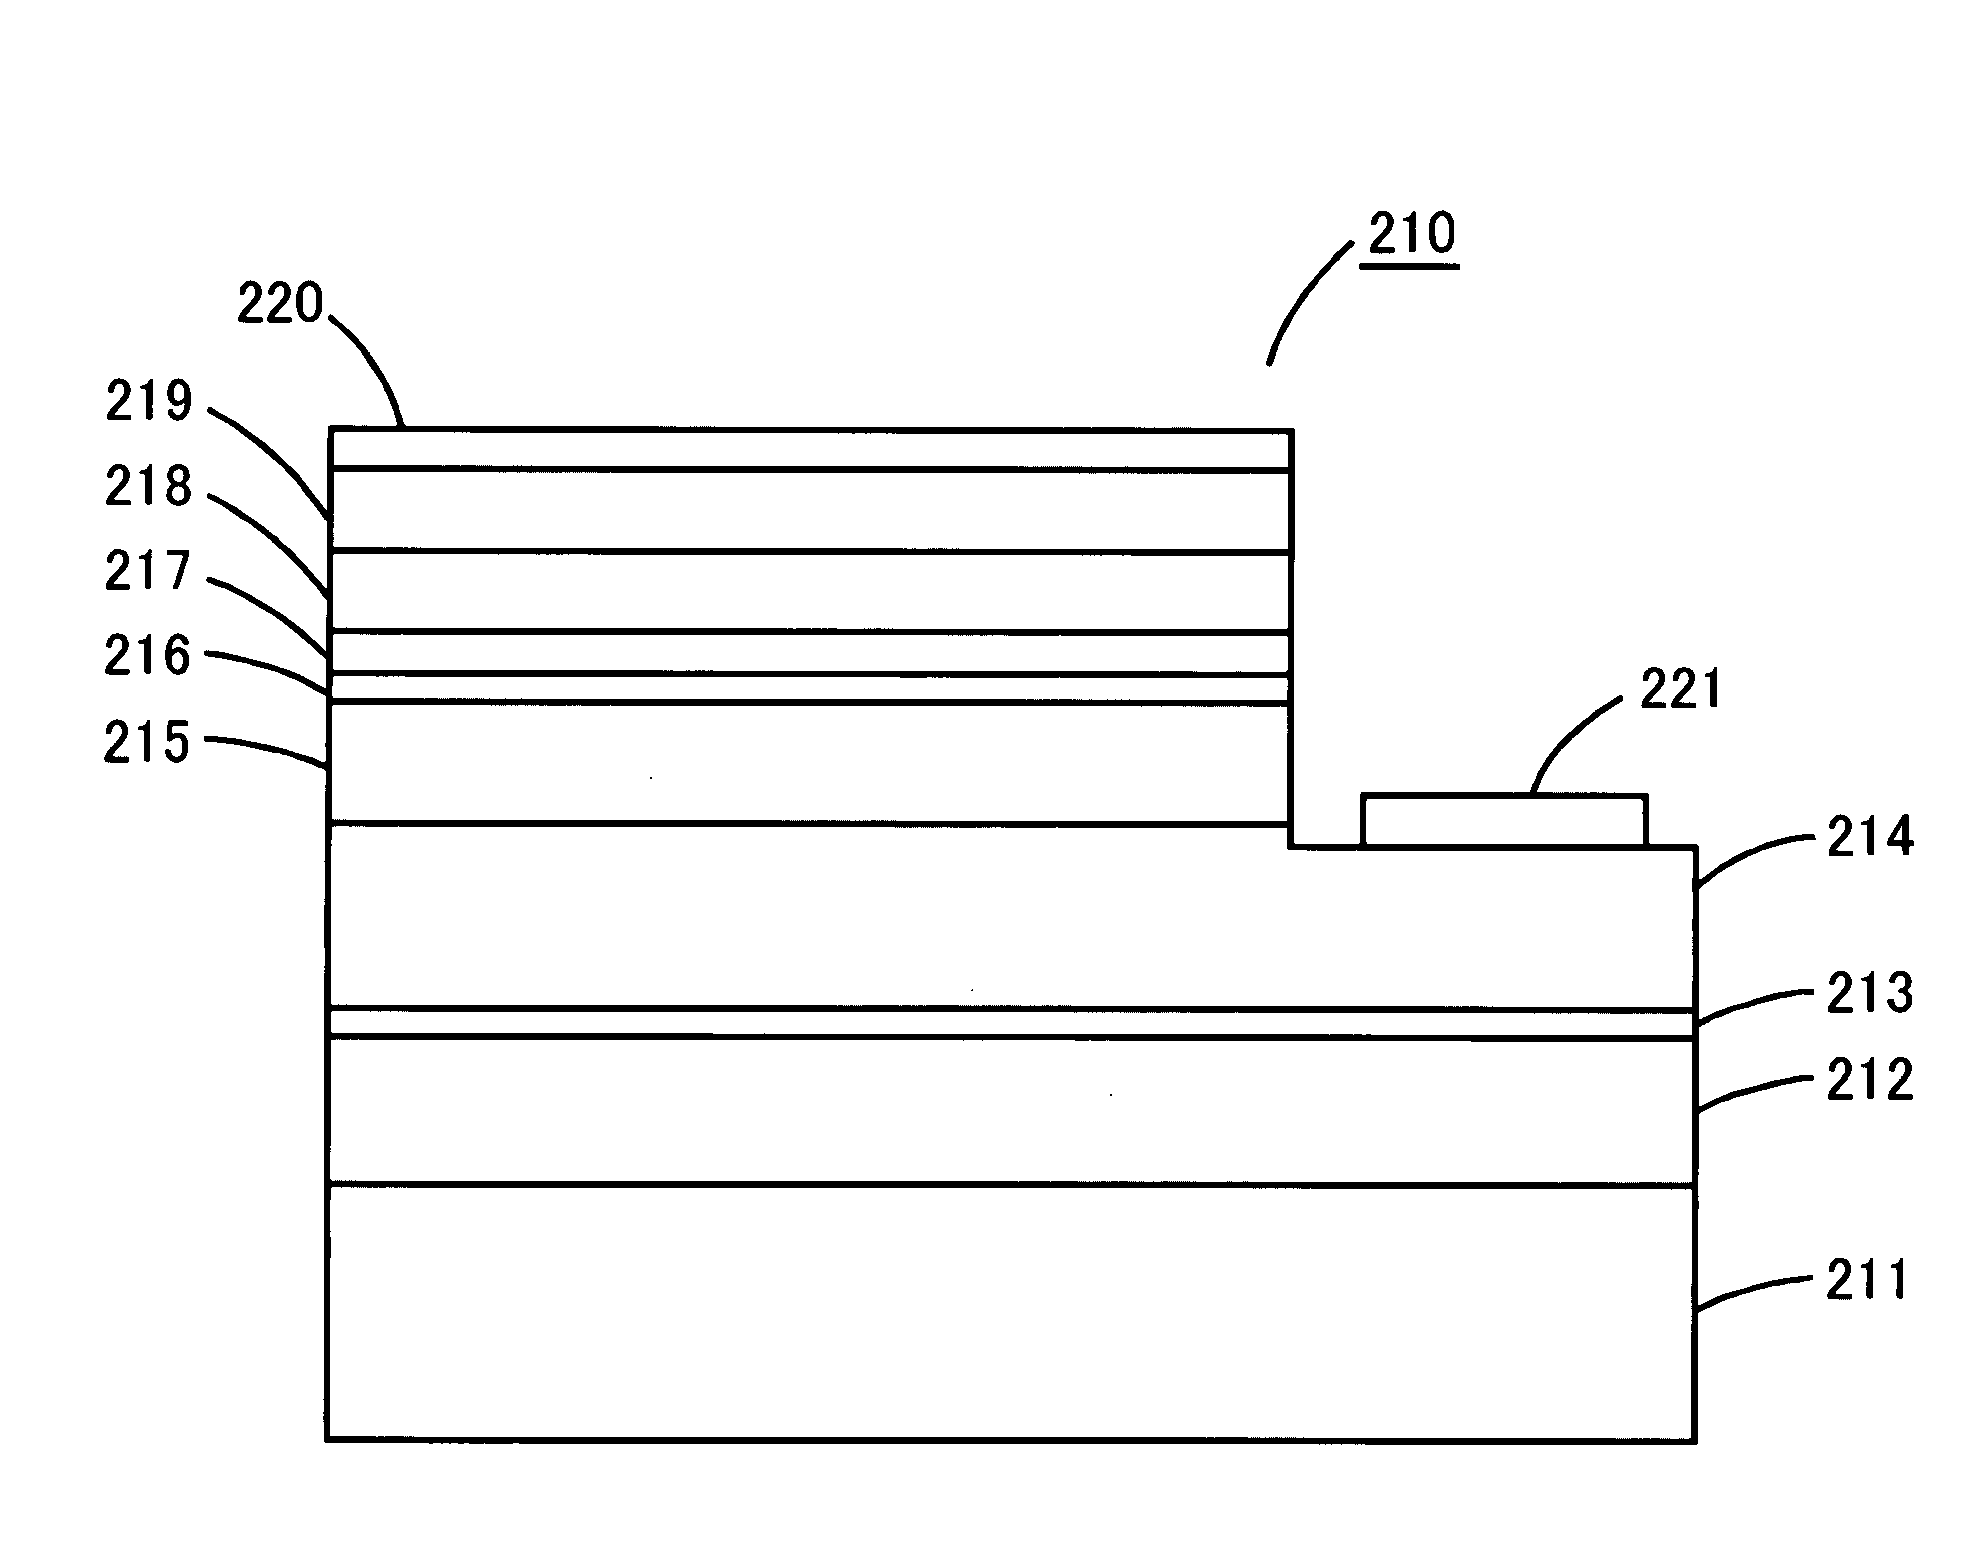 SiC crystal and semiconductor device